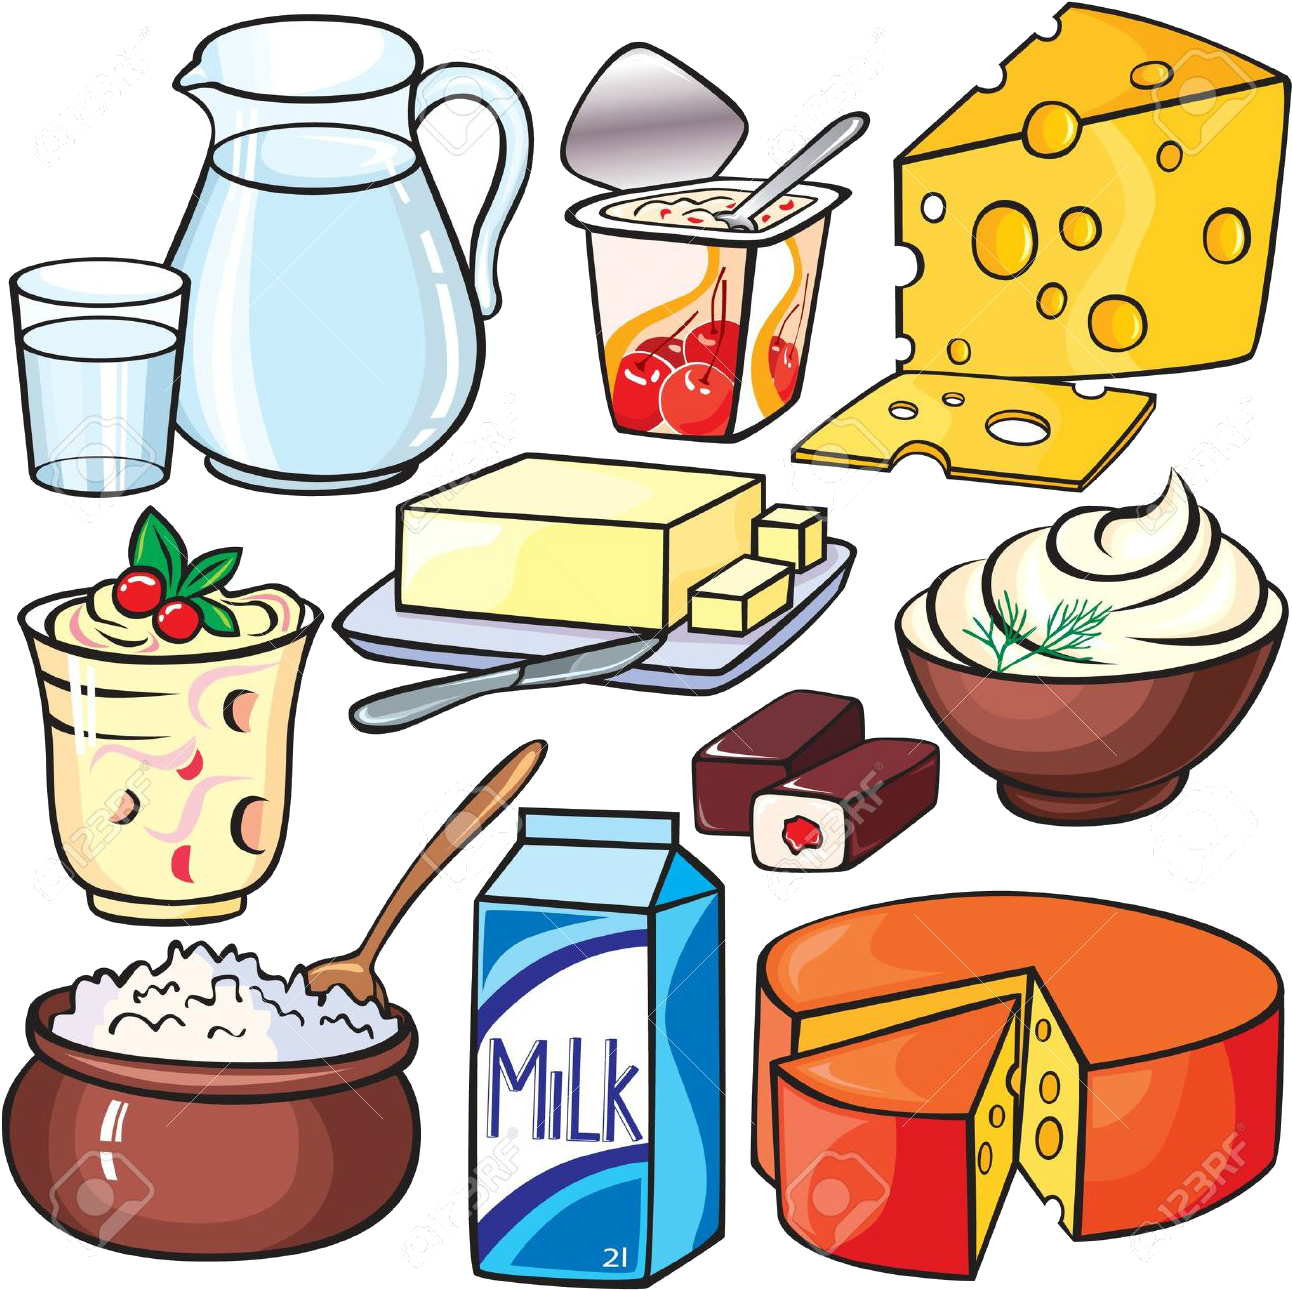 Required Daily Intake - Dairy Products Cartoons (1300x1300)